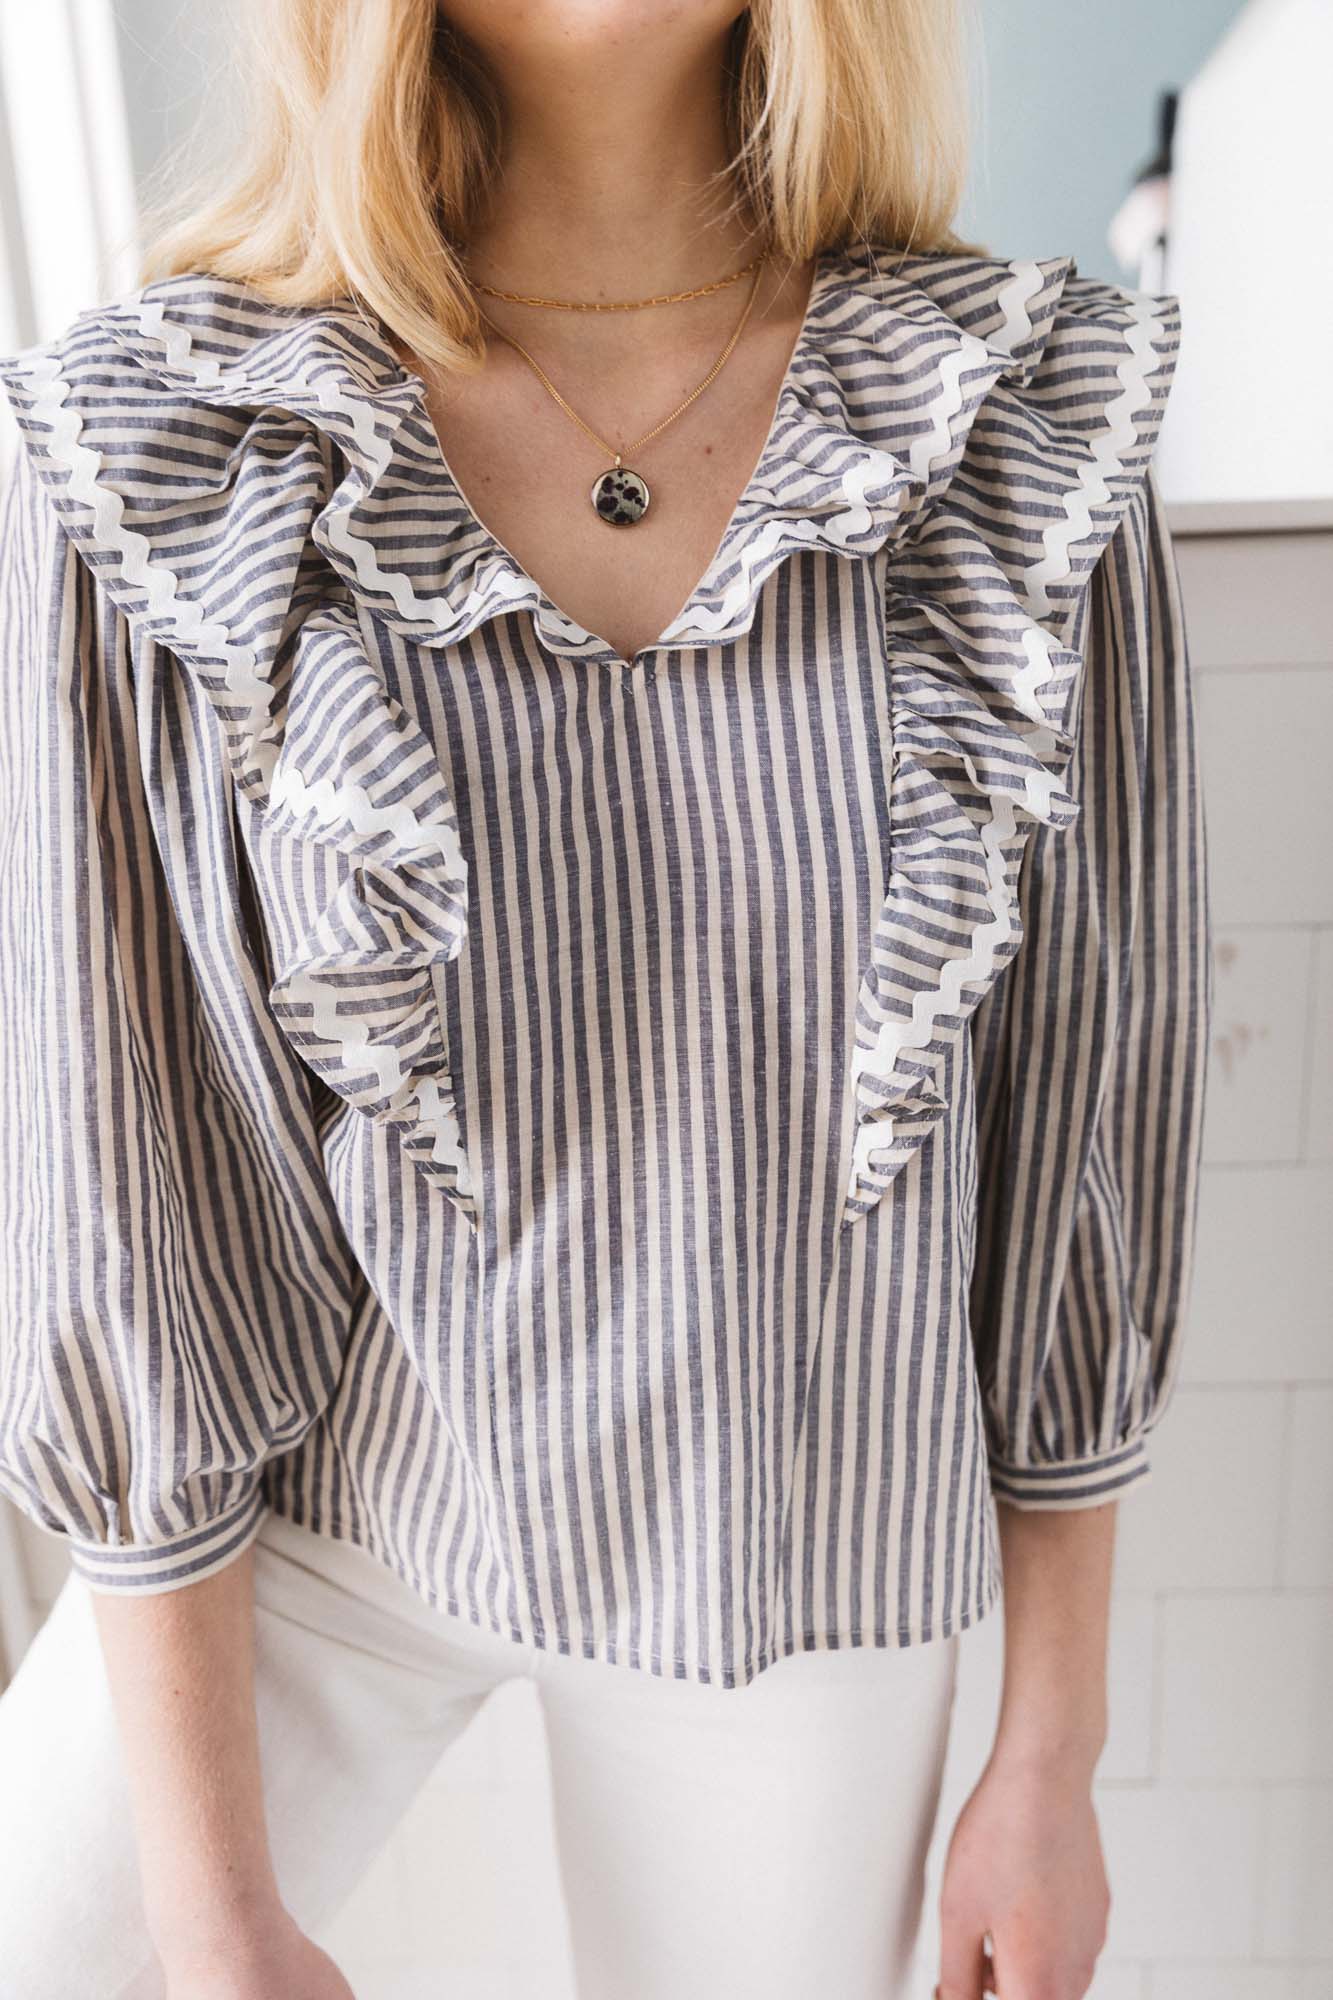 Récif blouse with blue and gray stripes